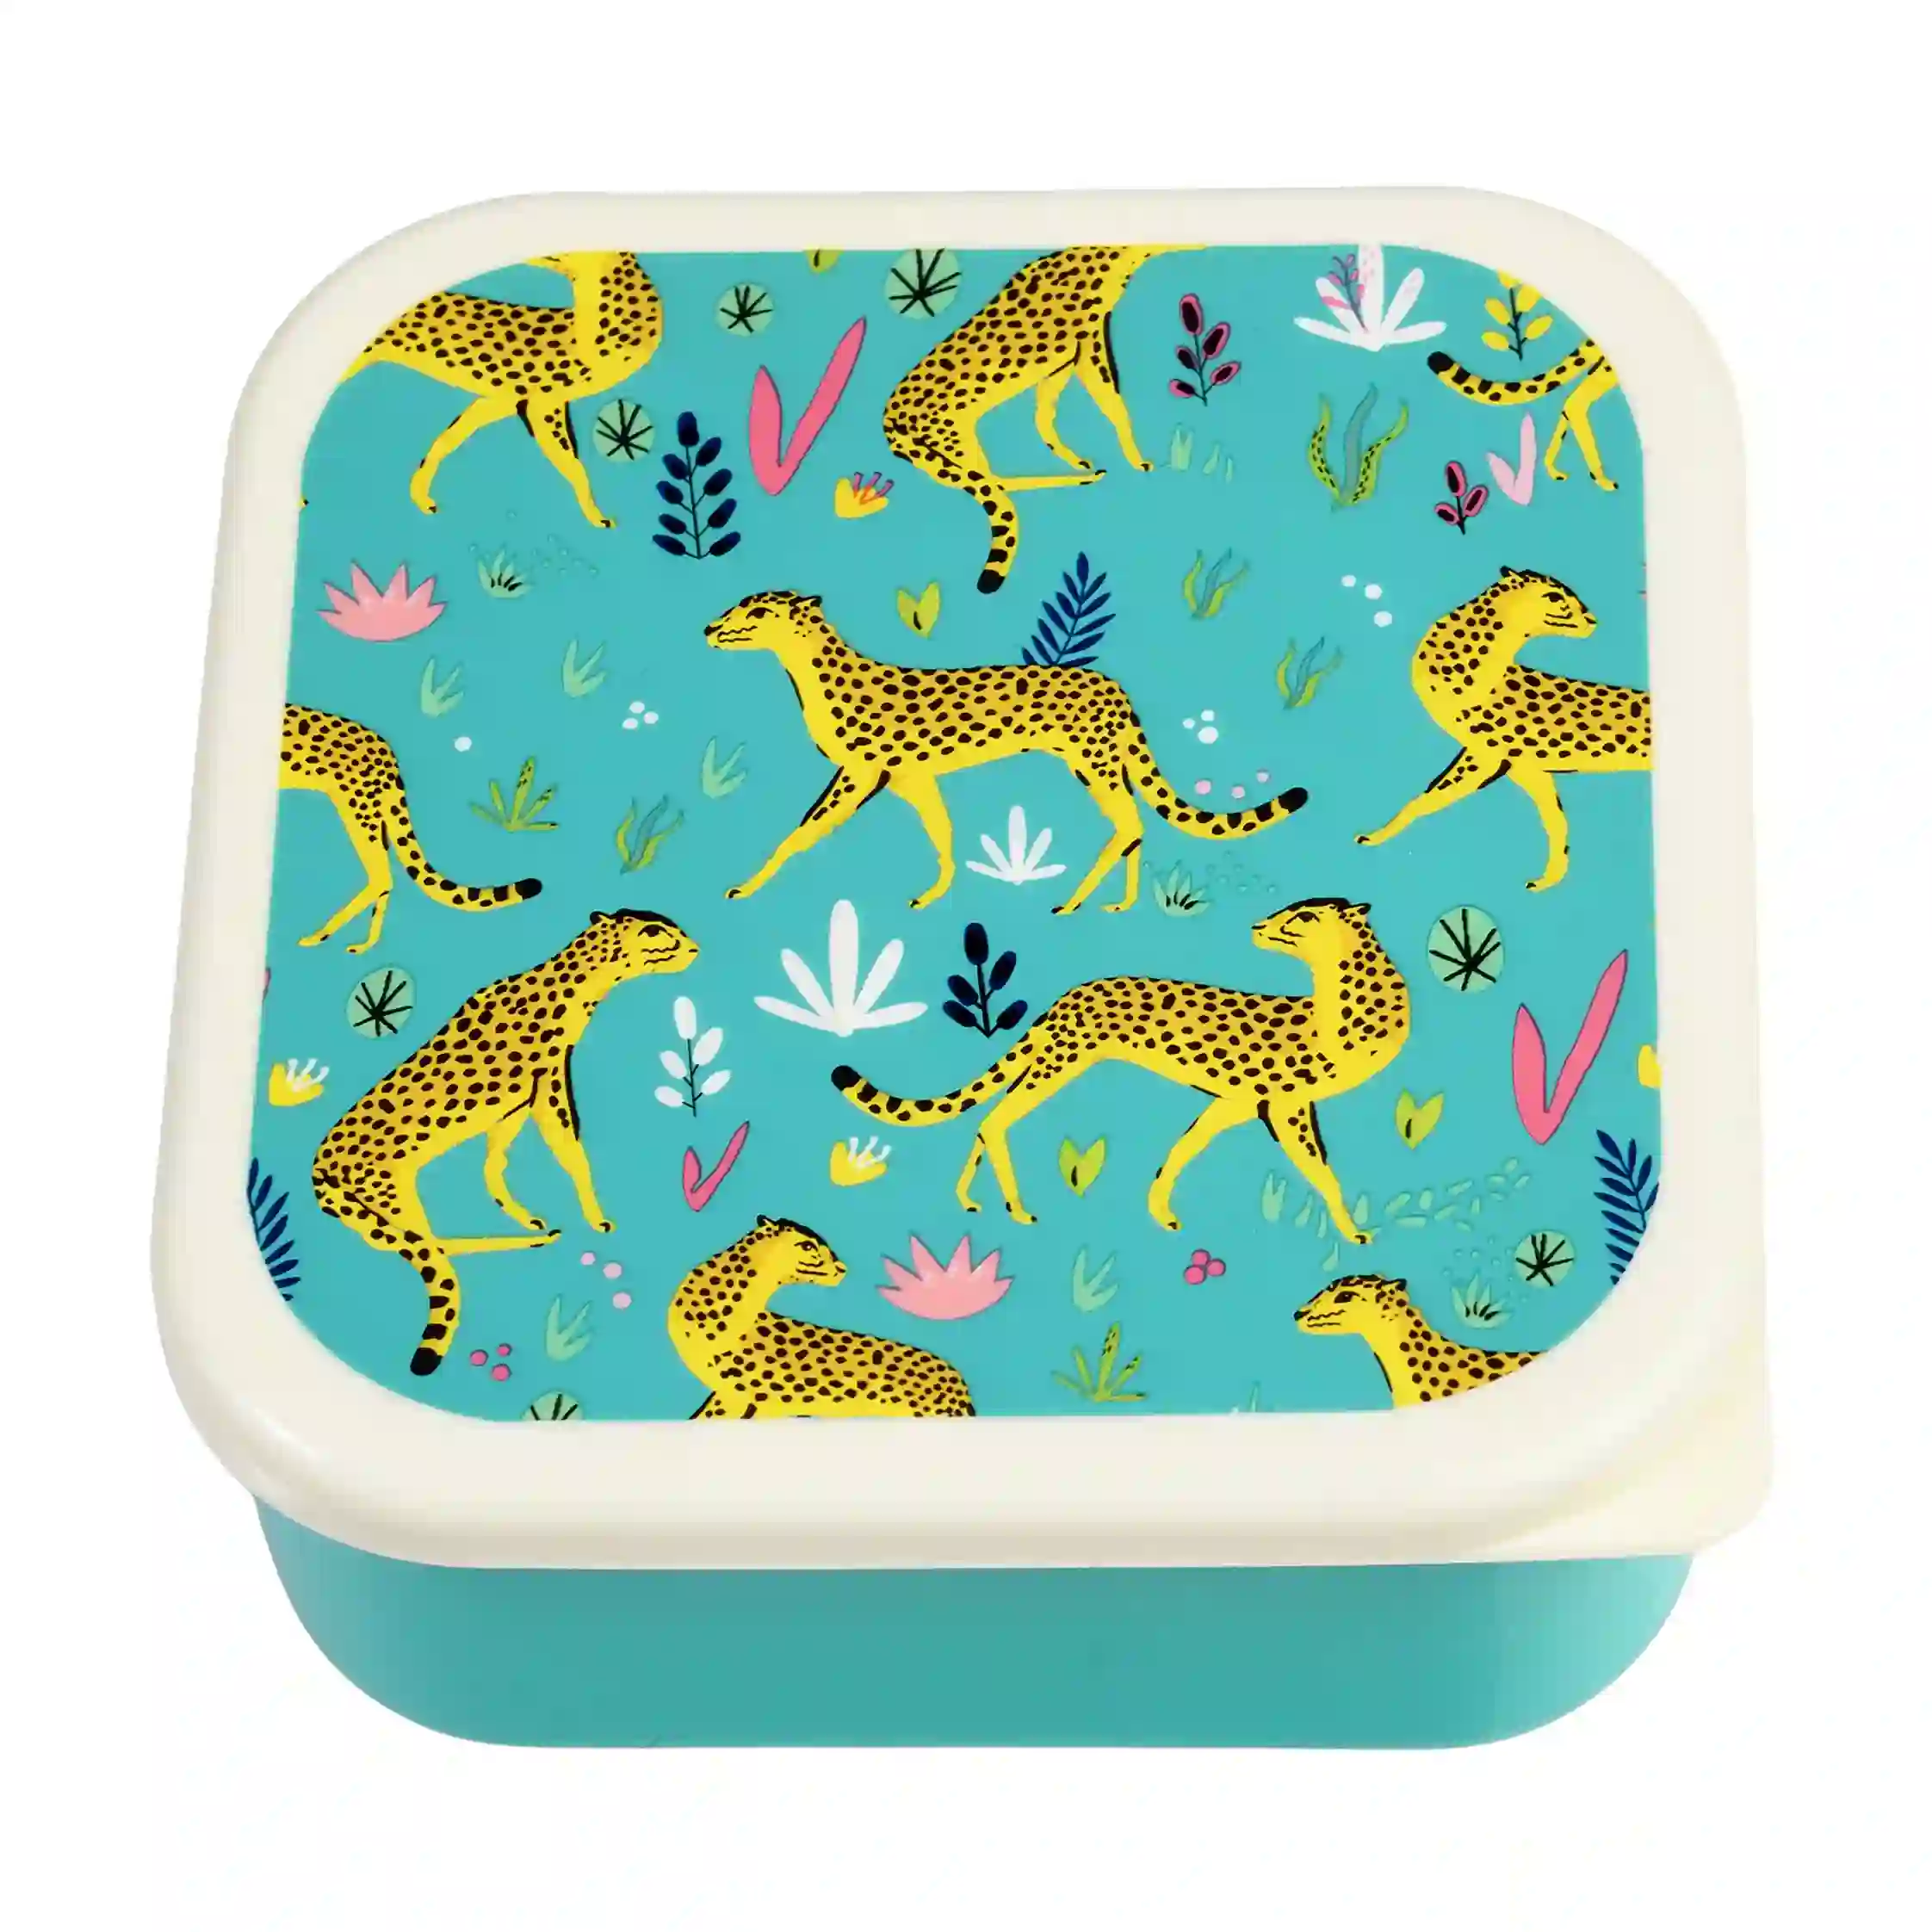 snack boxes (set of 3) - cheetah